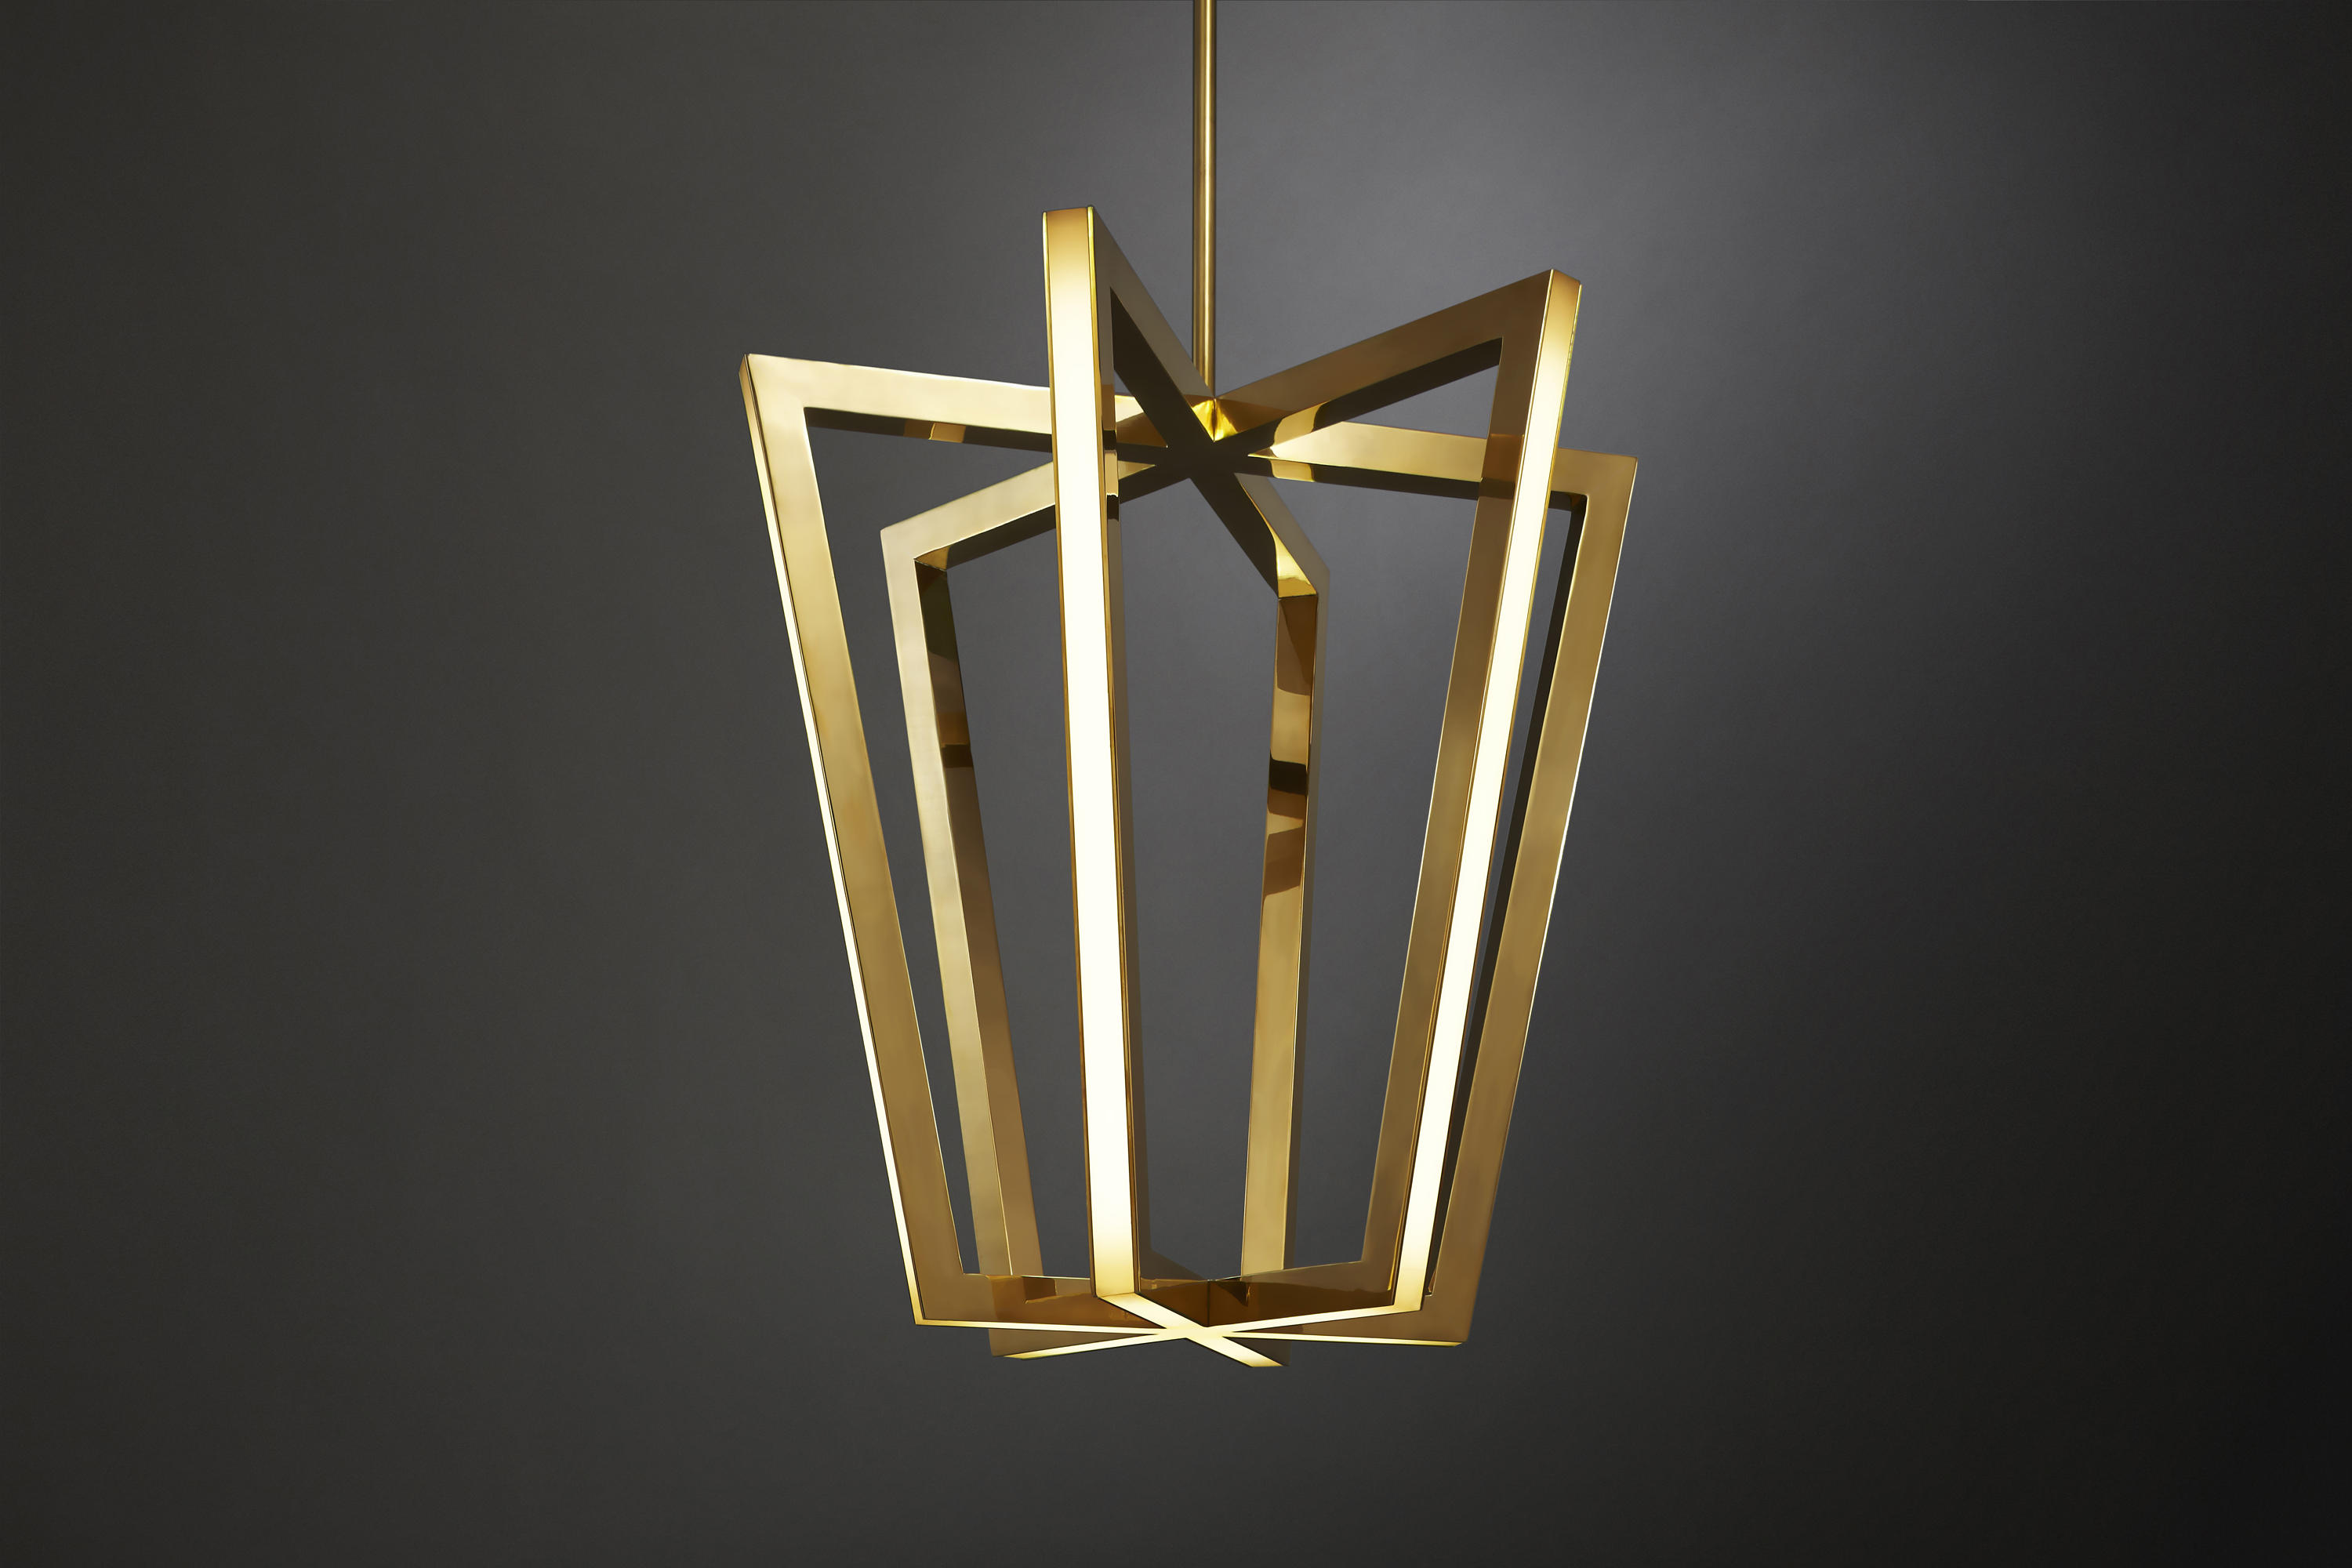 Asterix Suspended Lights From Christopher Boots Architonic